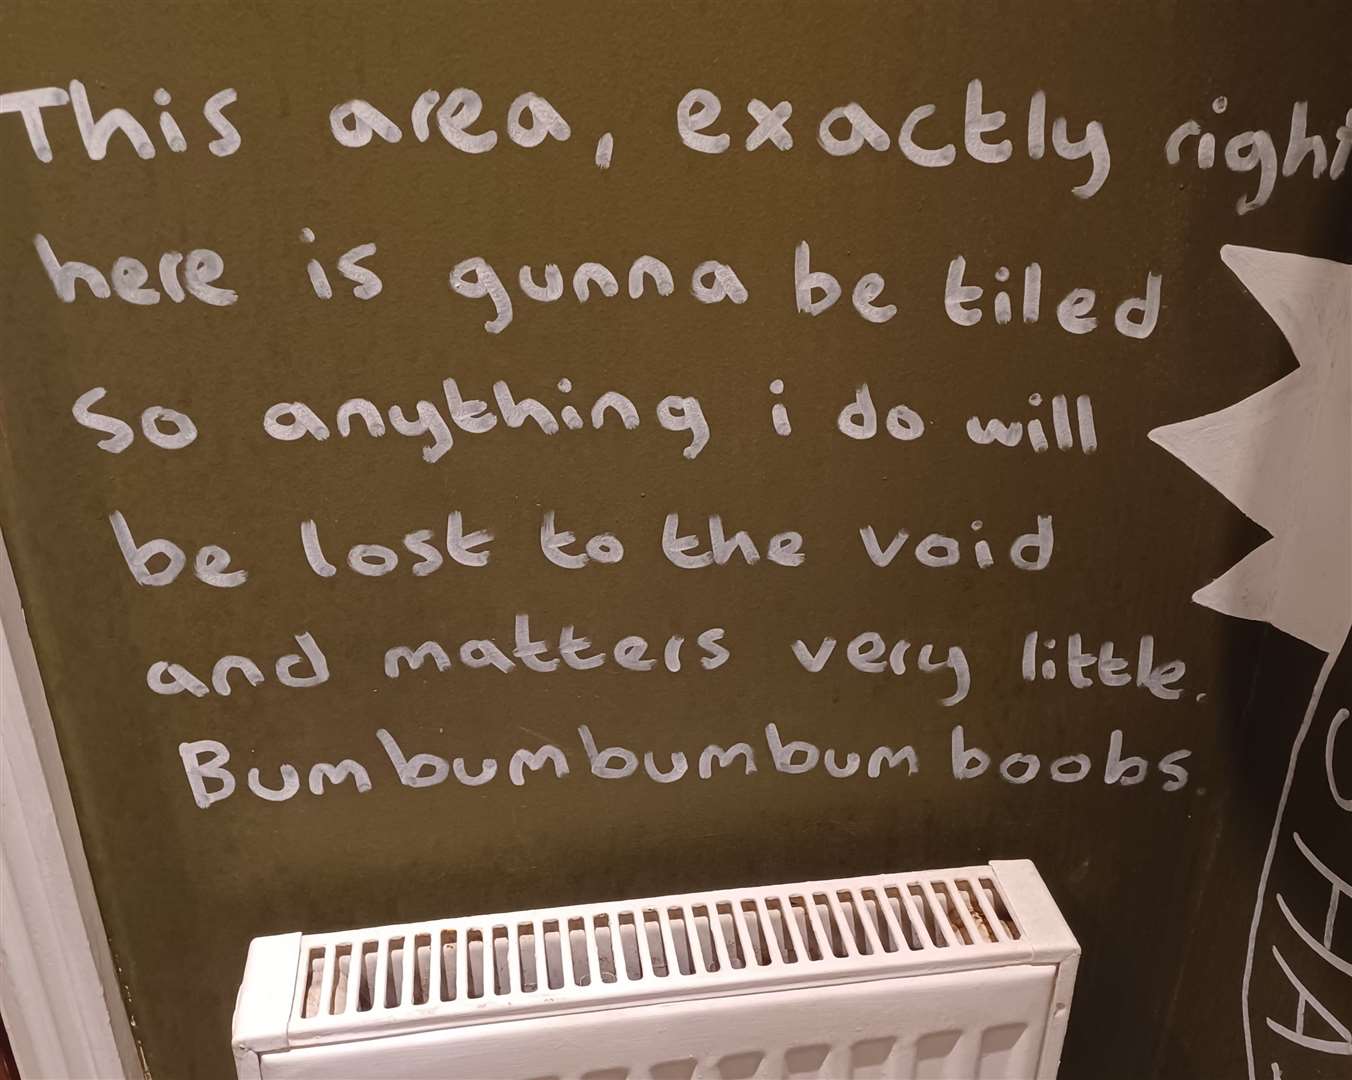 Make of this what you will, spotted in The Bao Baron's toilets